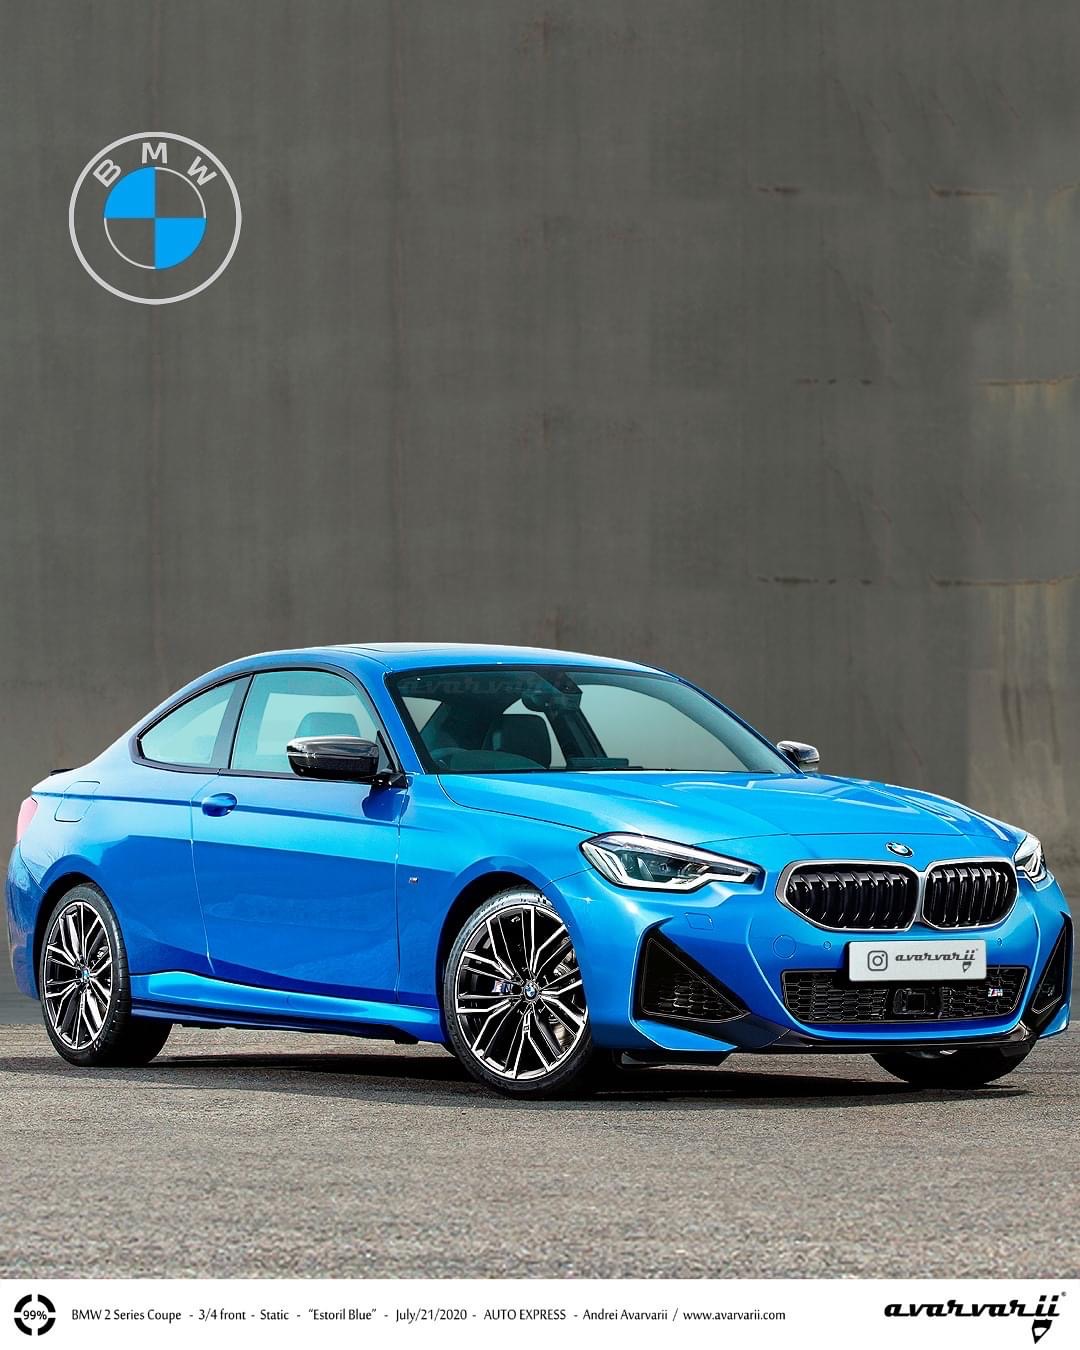 Rendered: Upcoming 2021 BMW 2 Series Coupe rear-wheel drive